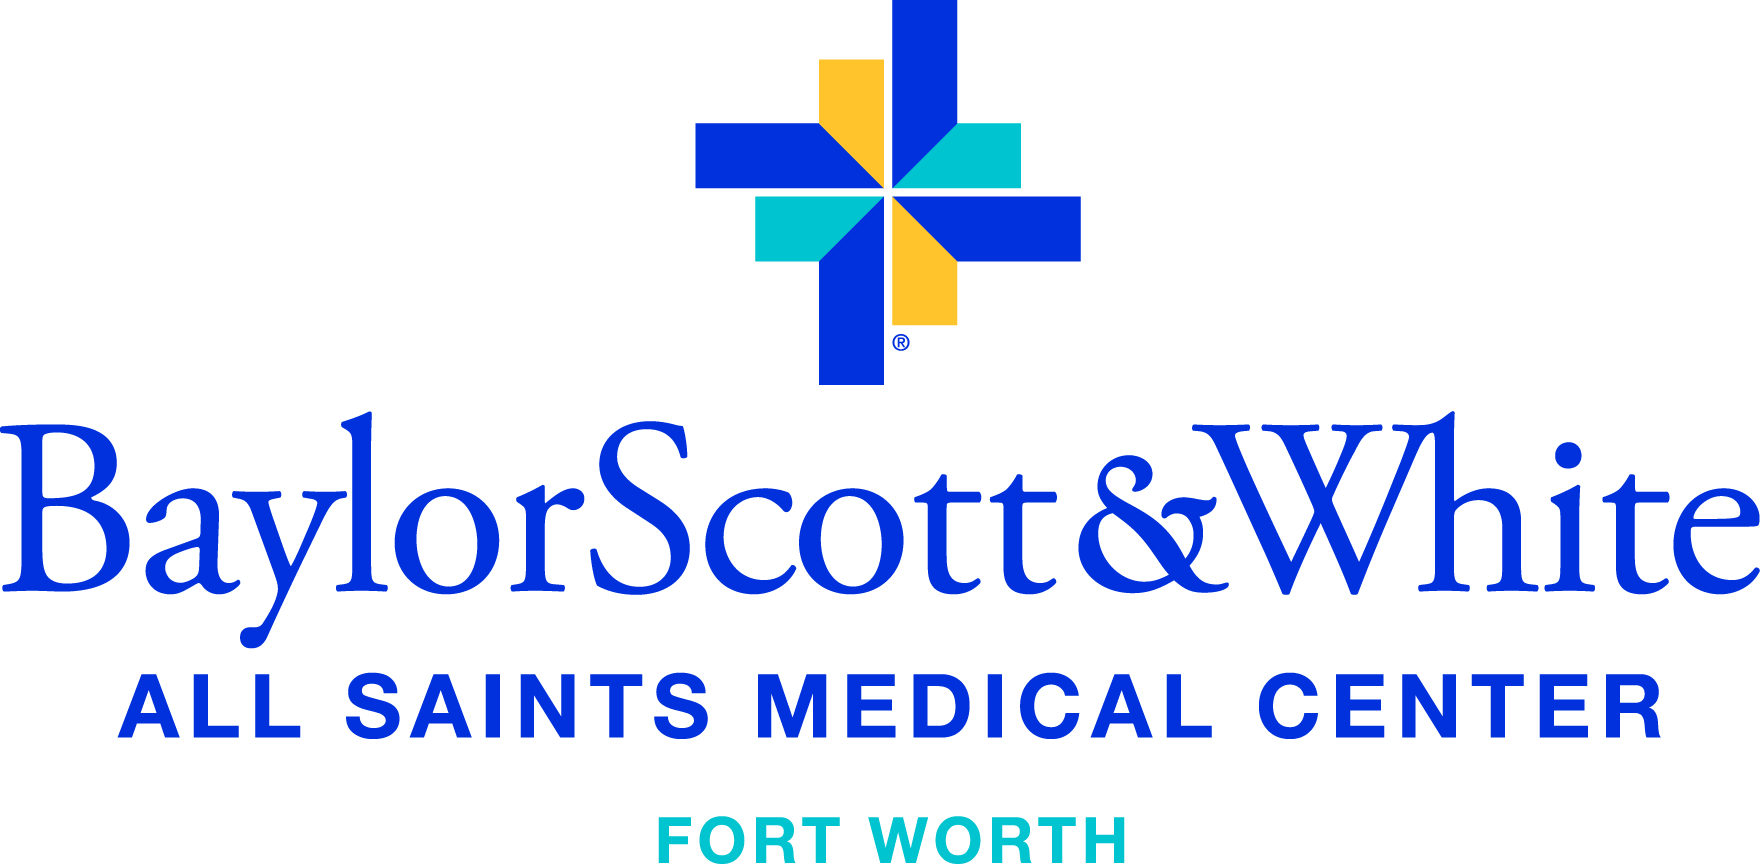 Endocrinology Opportunity in Fort Worth, Texas - Baylor Scott & White All Saints Medical Center - Fort Worth